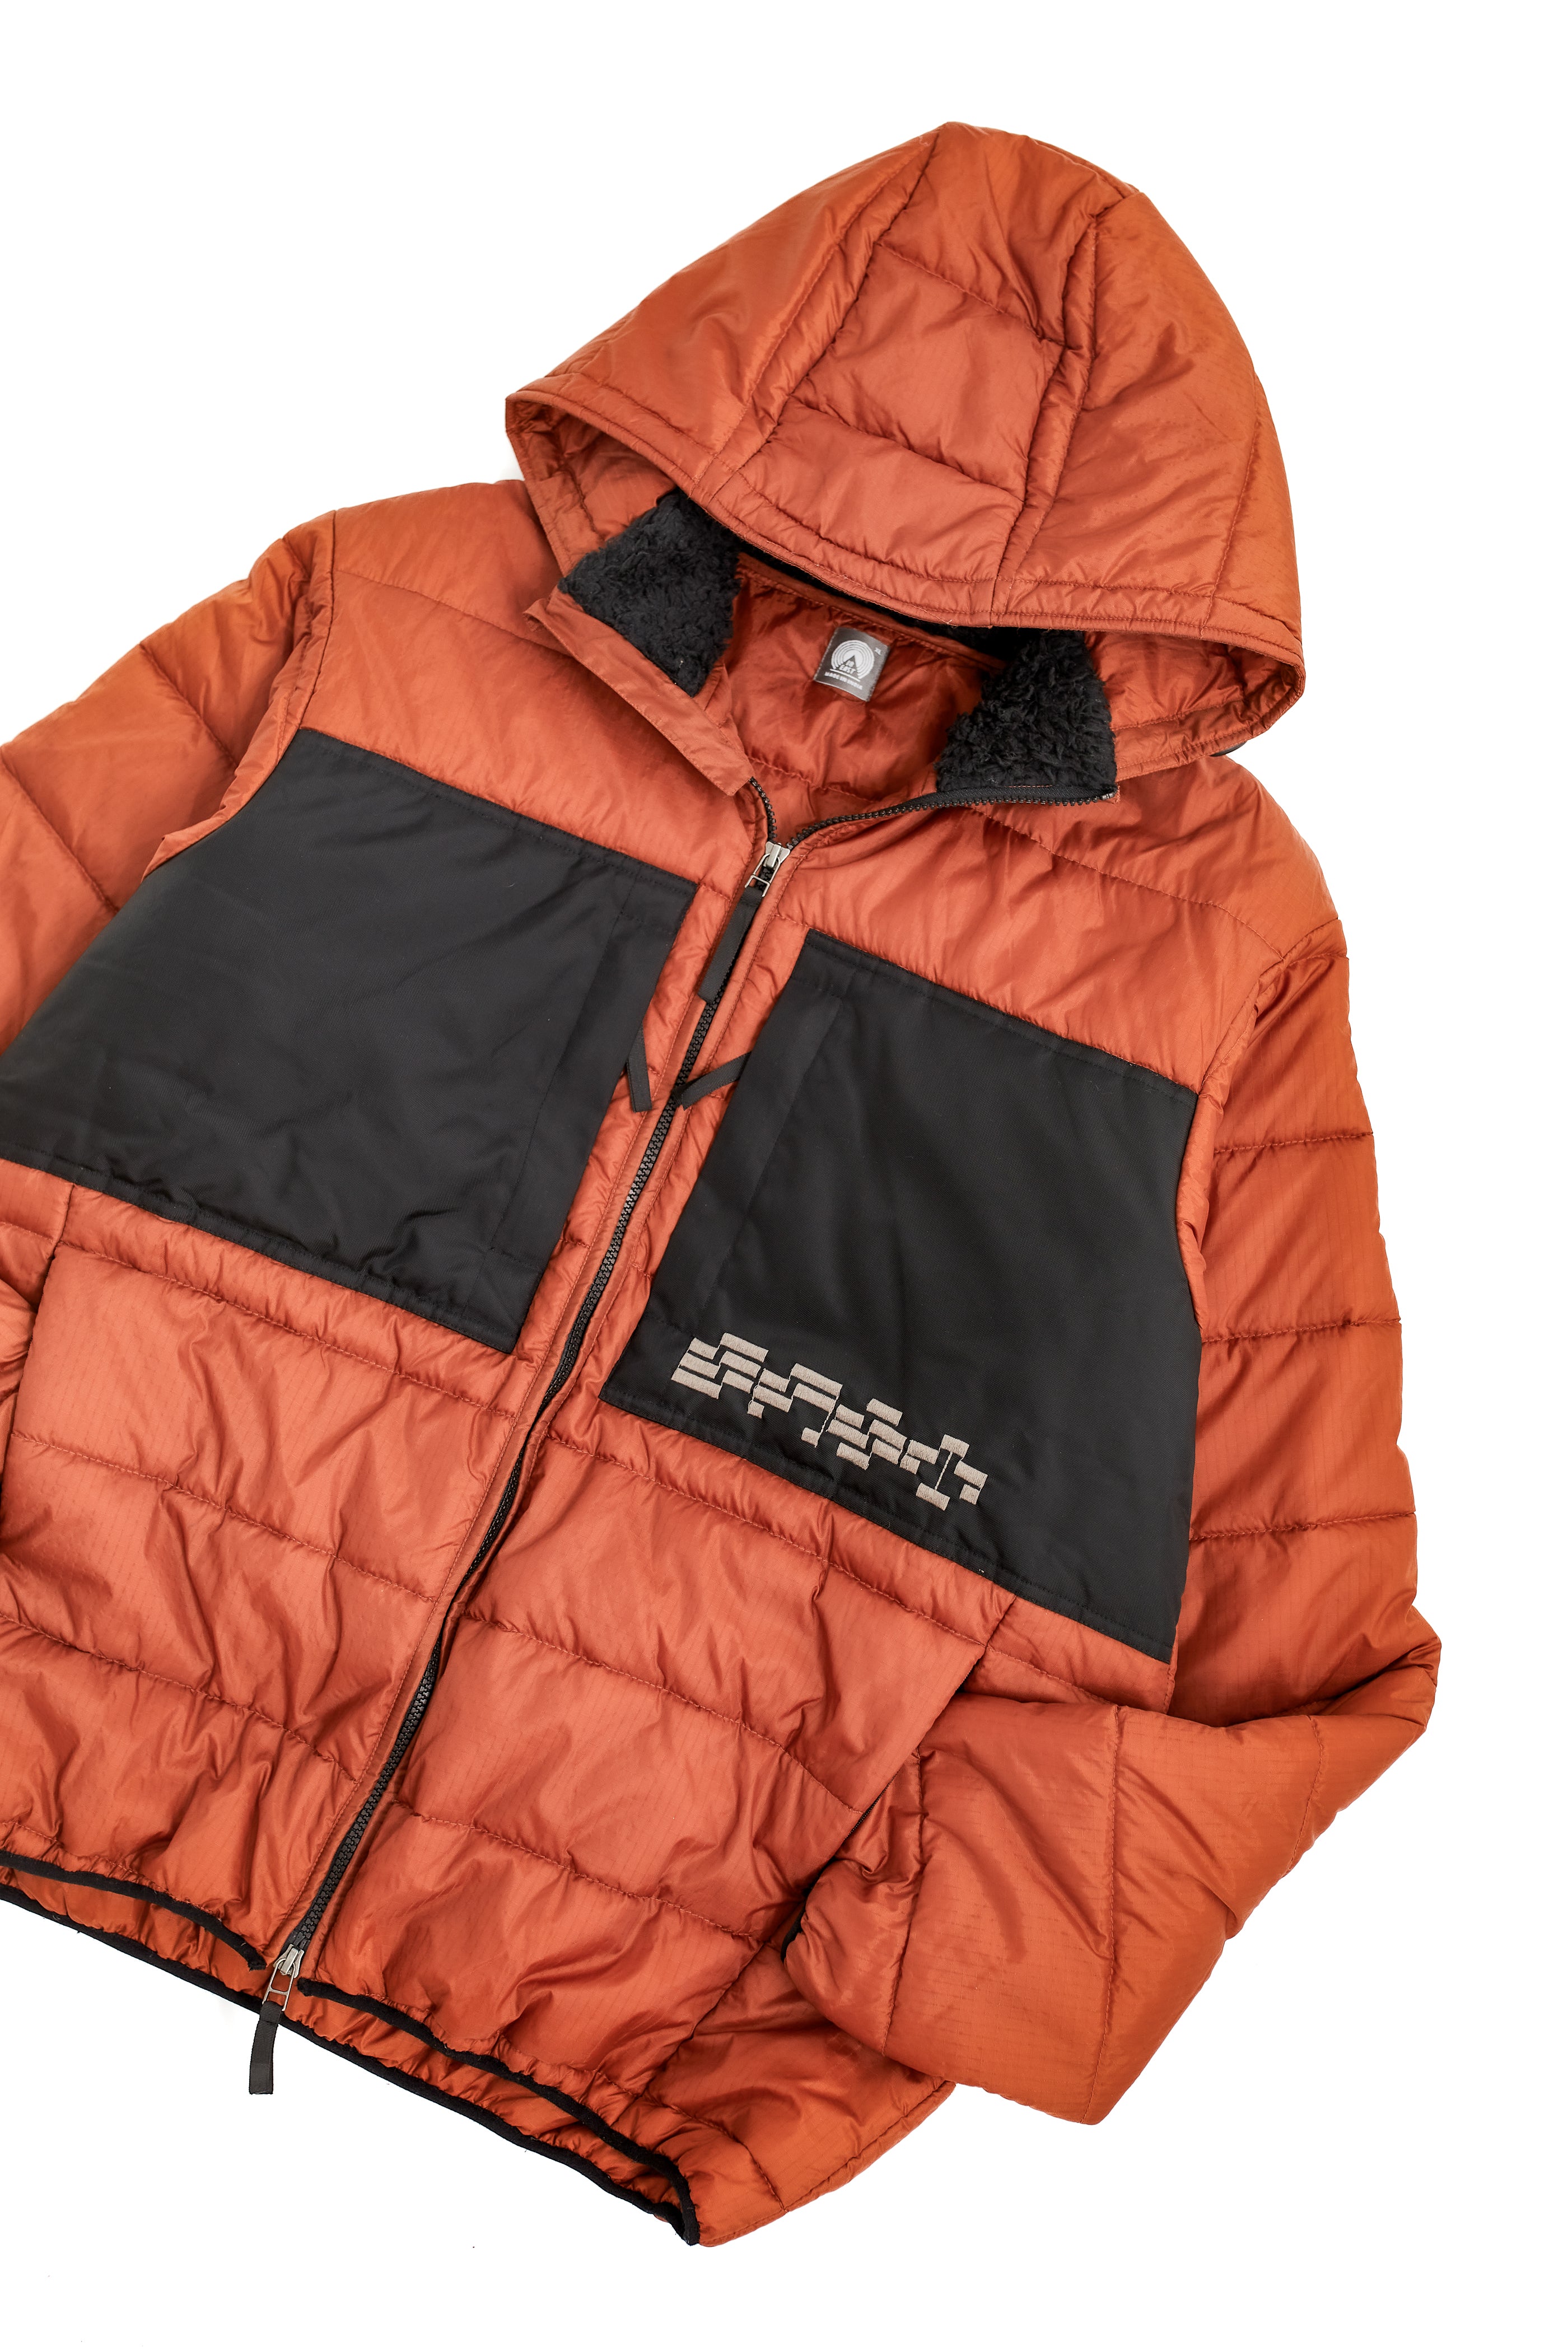 CHITTENDEN QUILTED PARKA - RUST NYLON RIPSTOP